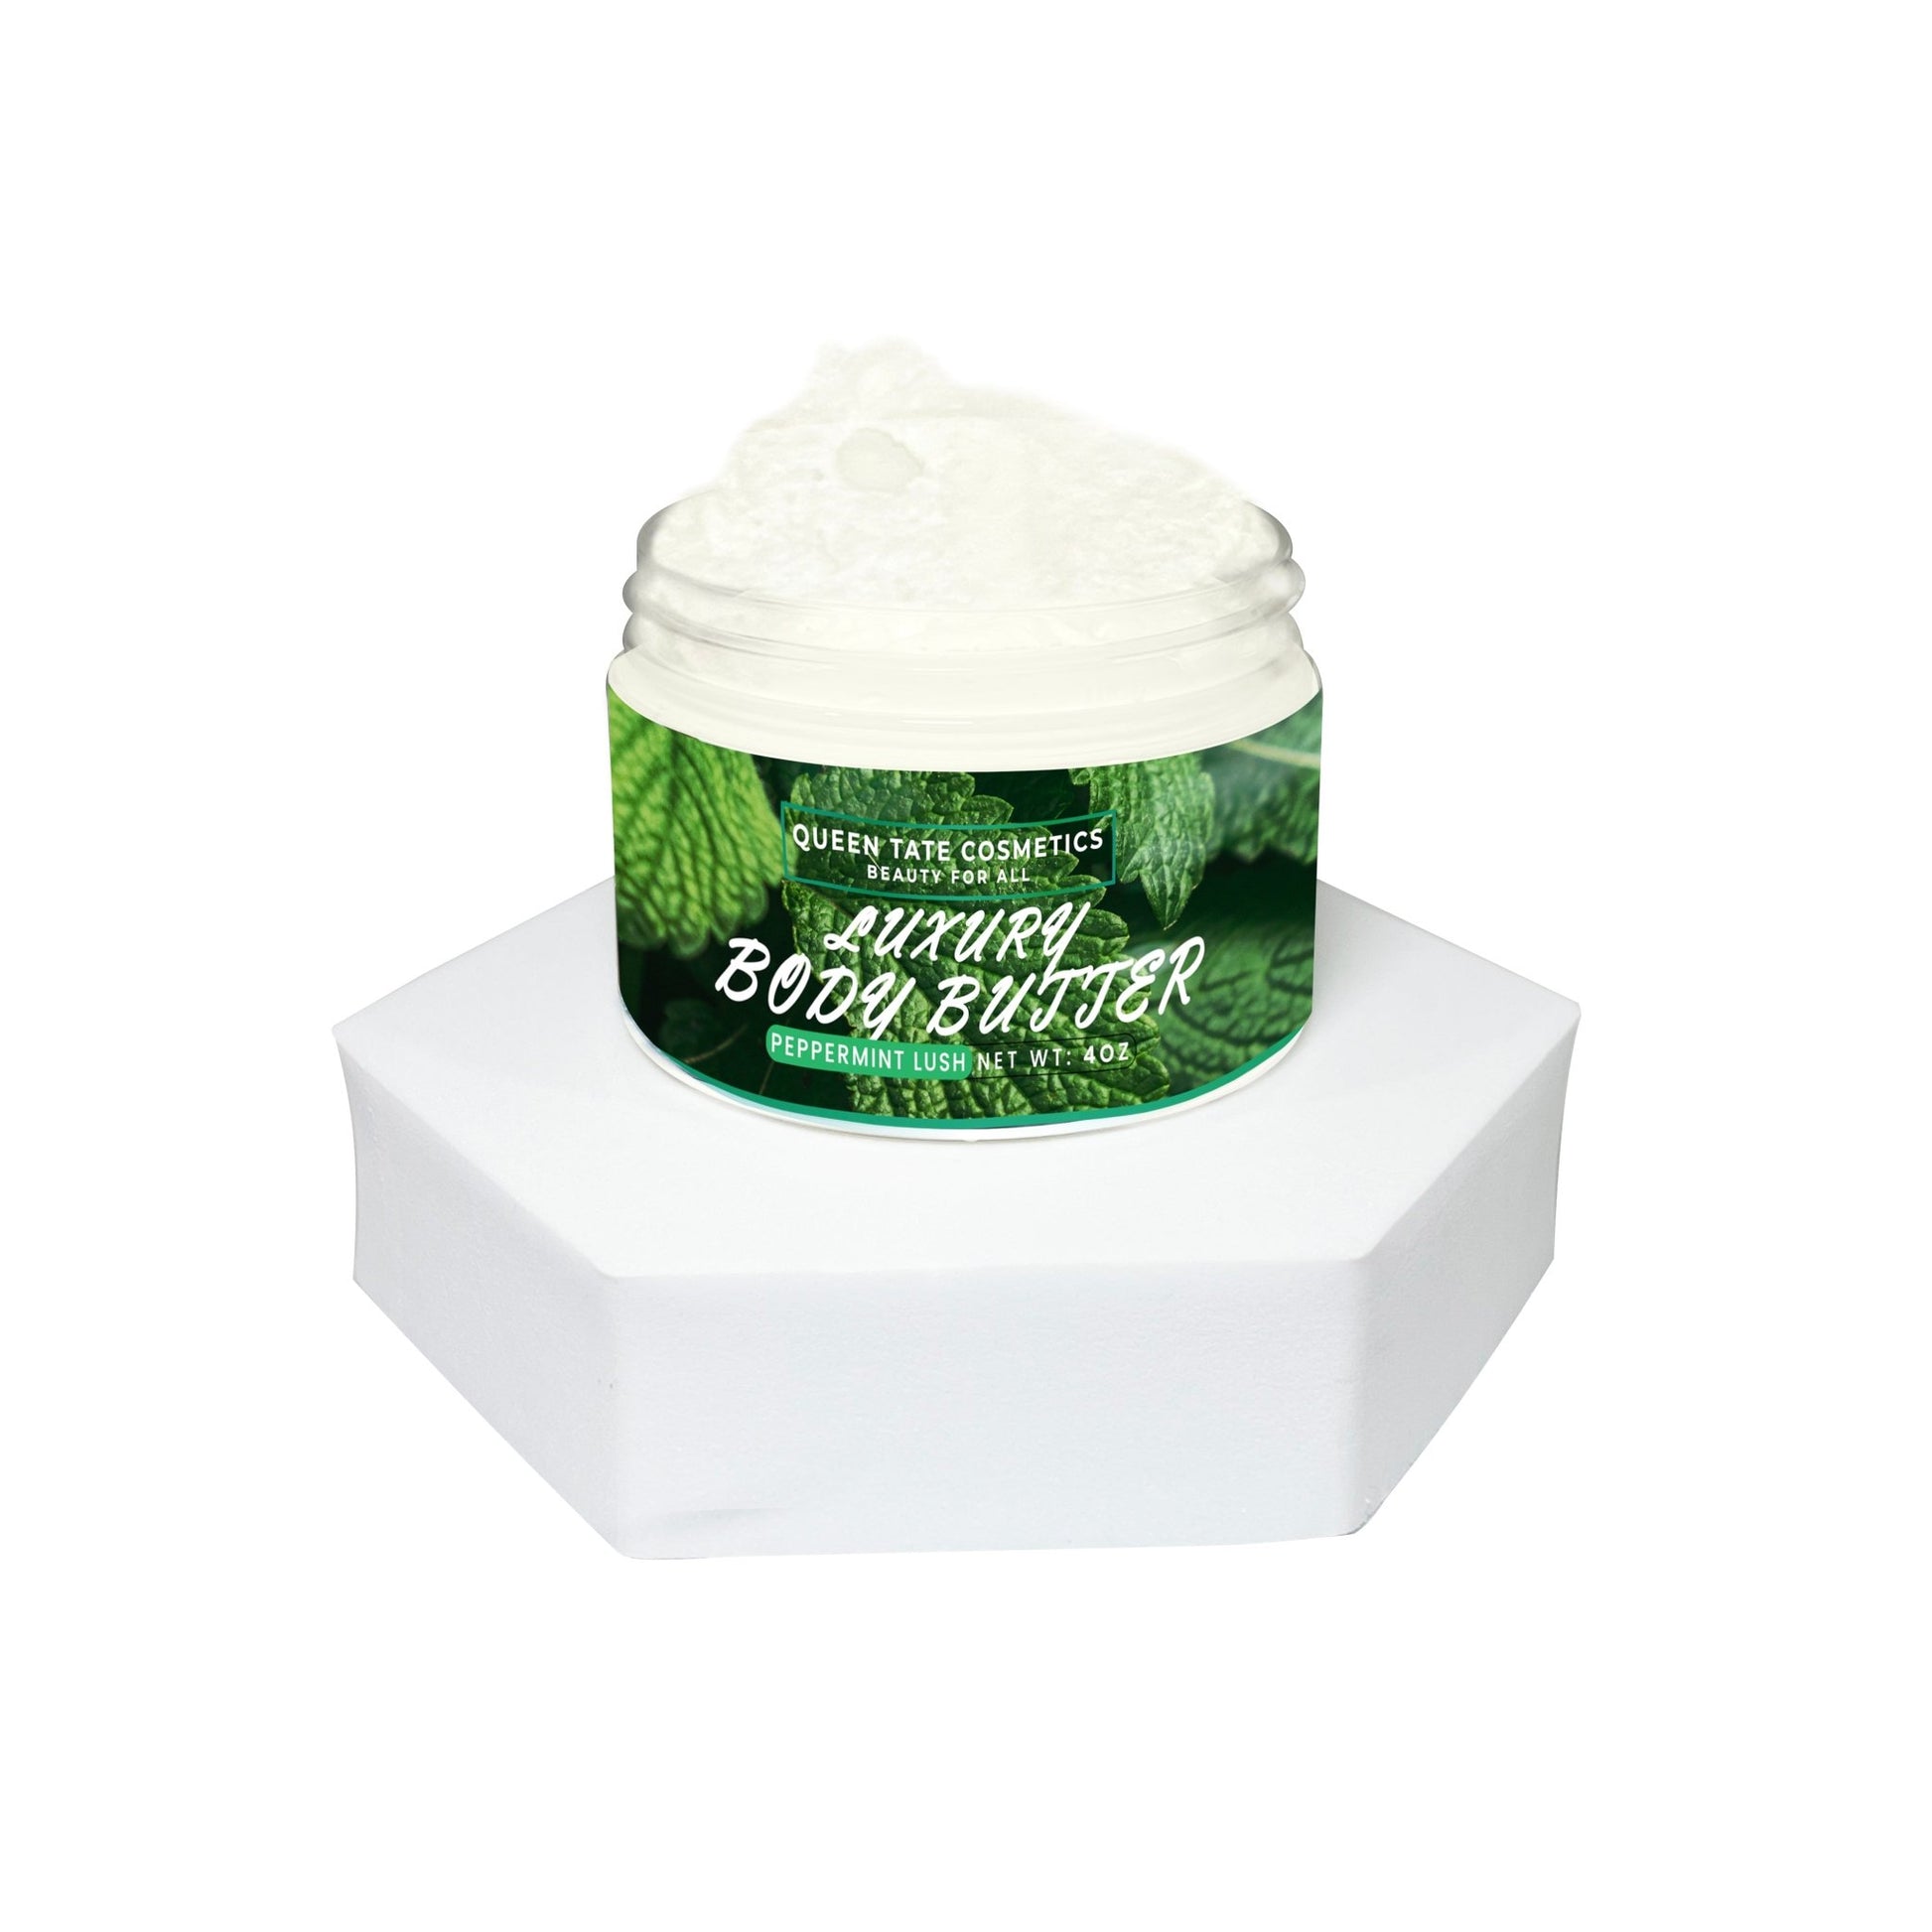 Peppermint Lush-Handcrafted Body Butter - Queen Tate CosmeticsHandcrafted Luxury Body ButterPeppermint Lush-Handcrafted Body ButterHandcrafted Luxury Body ButterQueen Tate Cosmetics 4 oz